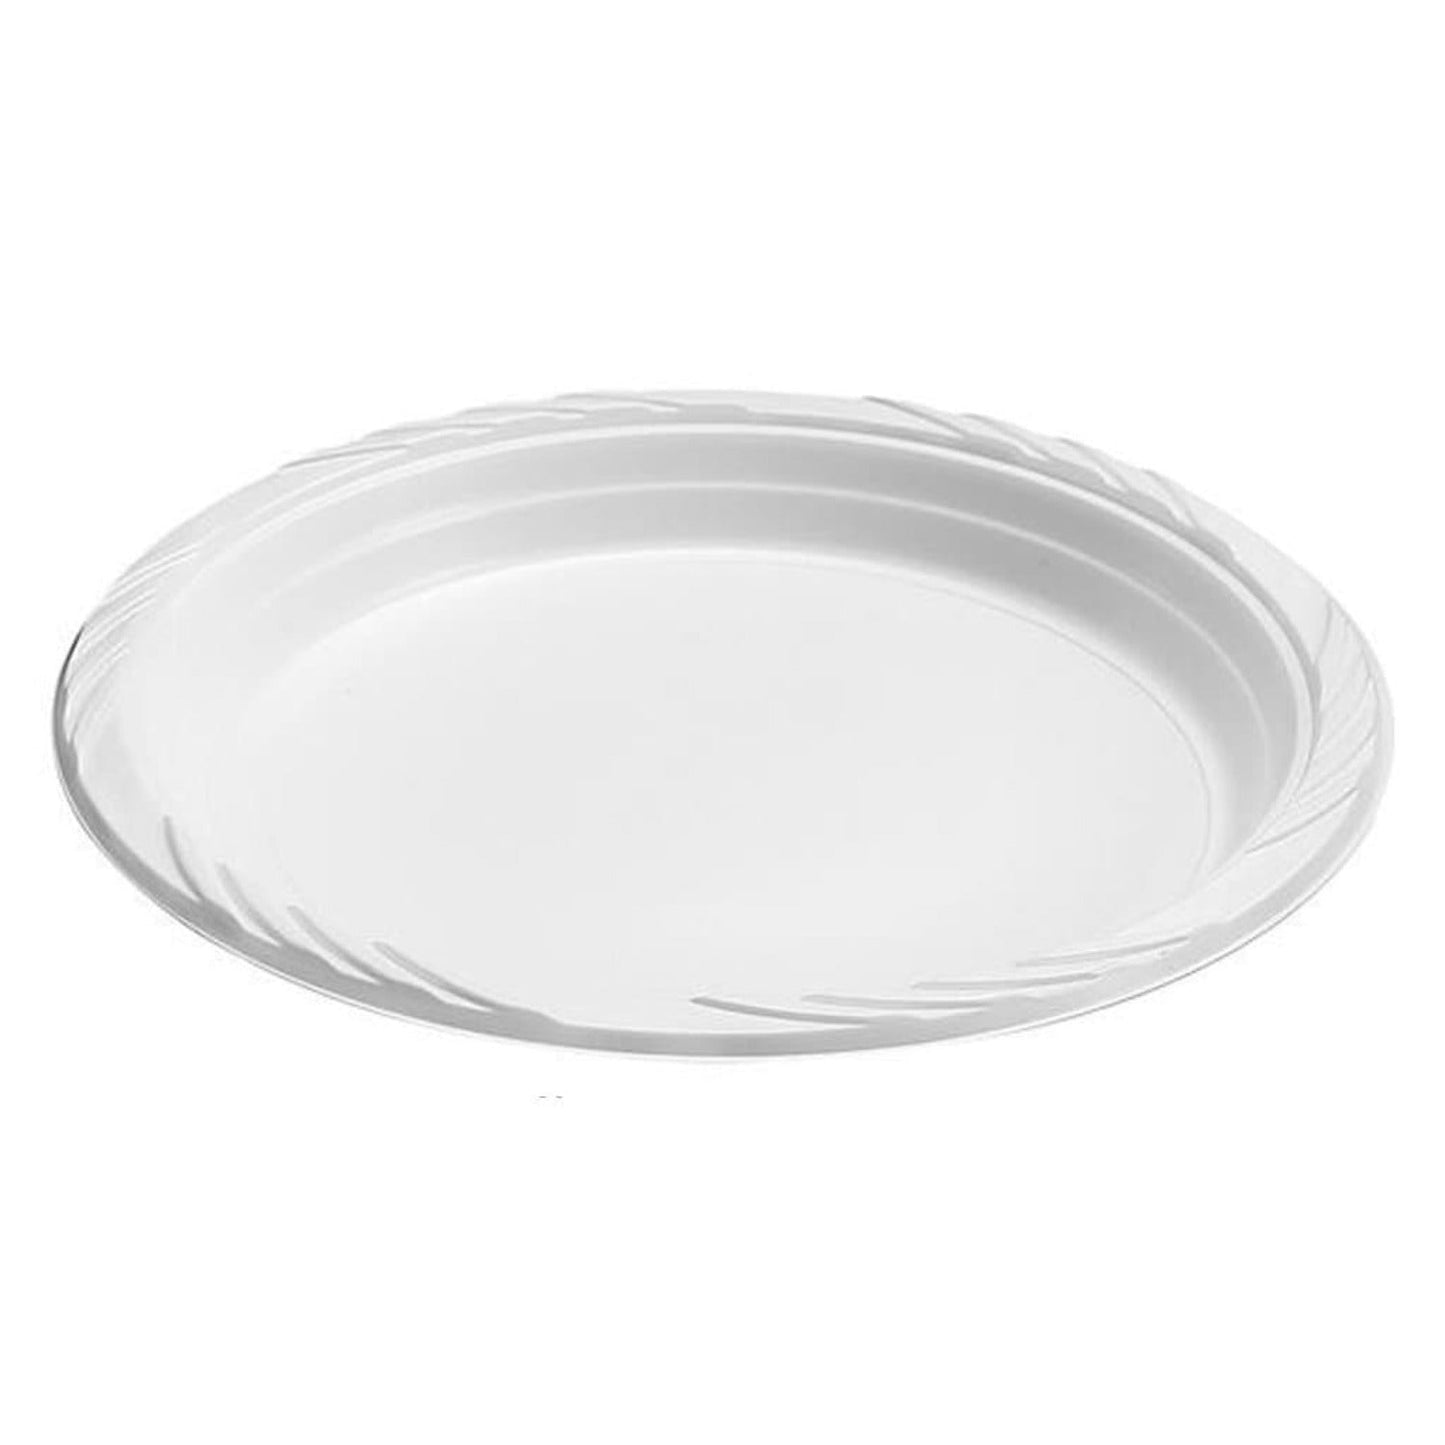 Case of Plastic - 9" - Disposable - Lightweight - White - Dinner Plates | 400 ct.  Blue Sky   